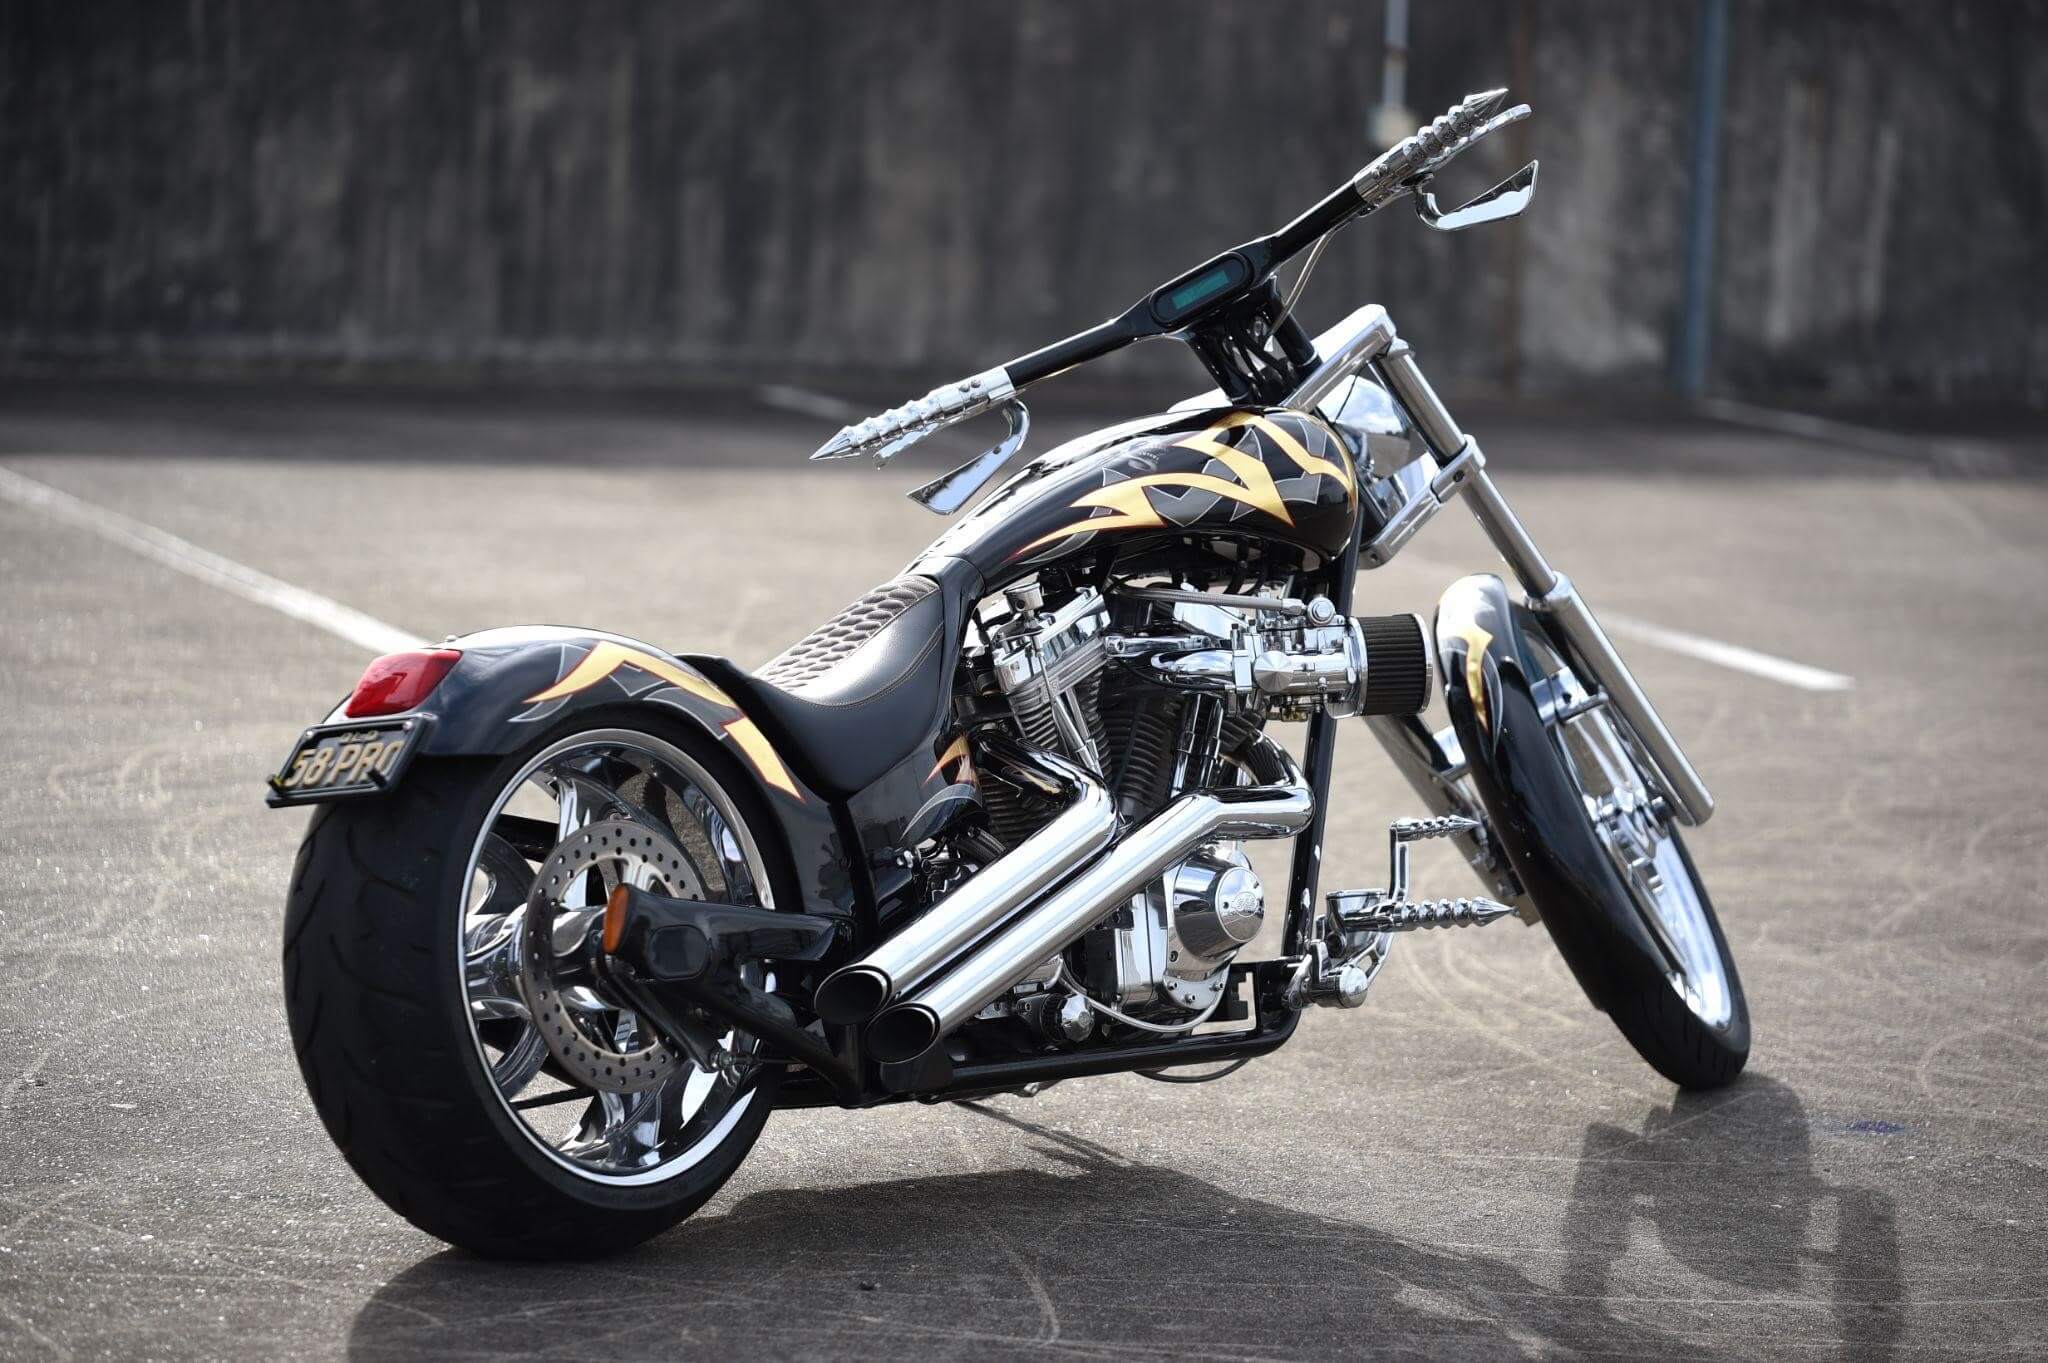 Custom motorcycle exhaust systems